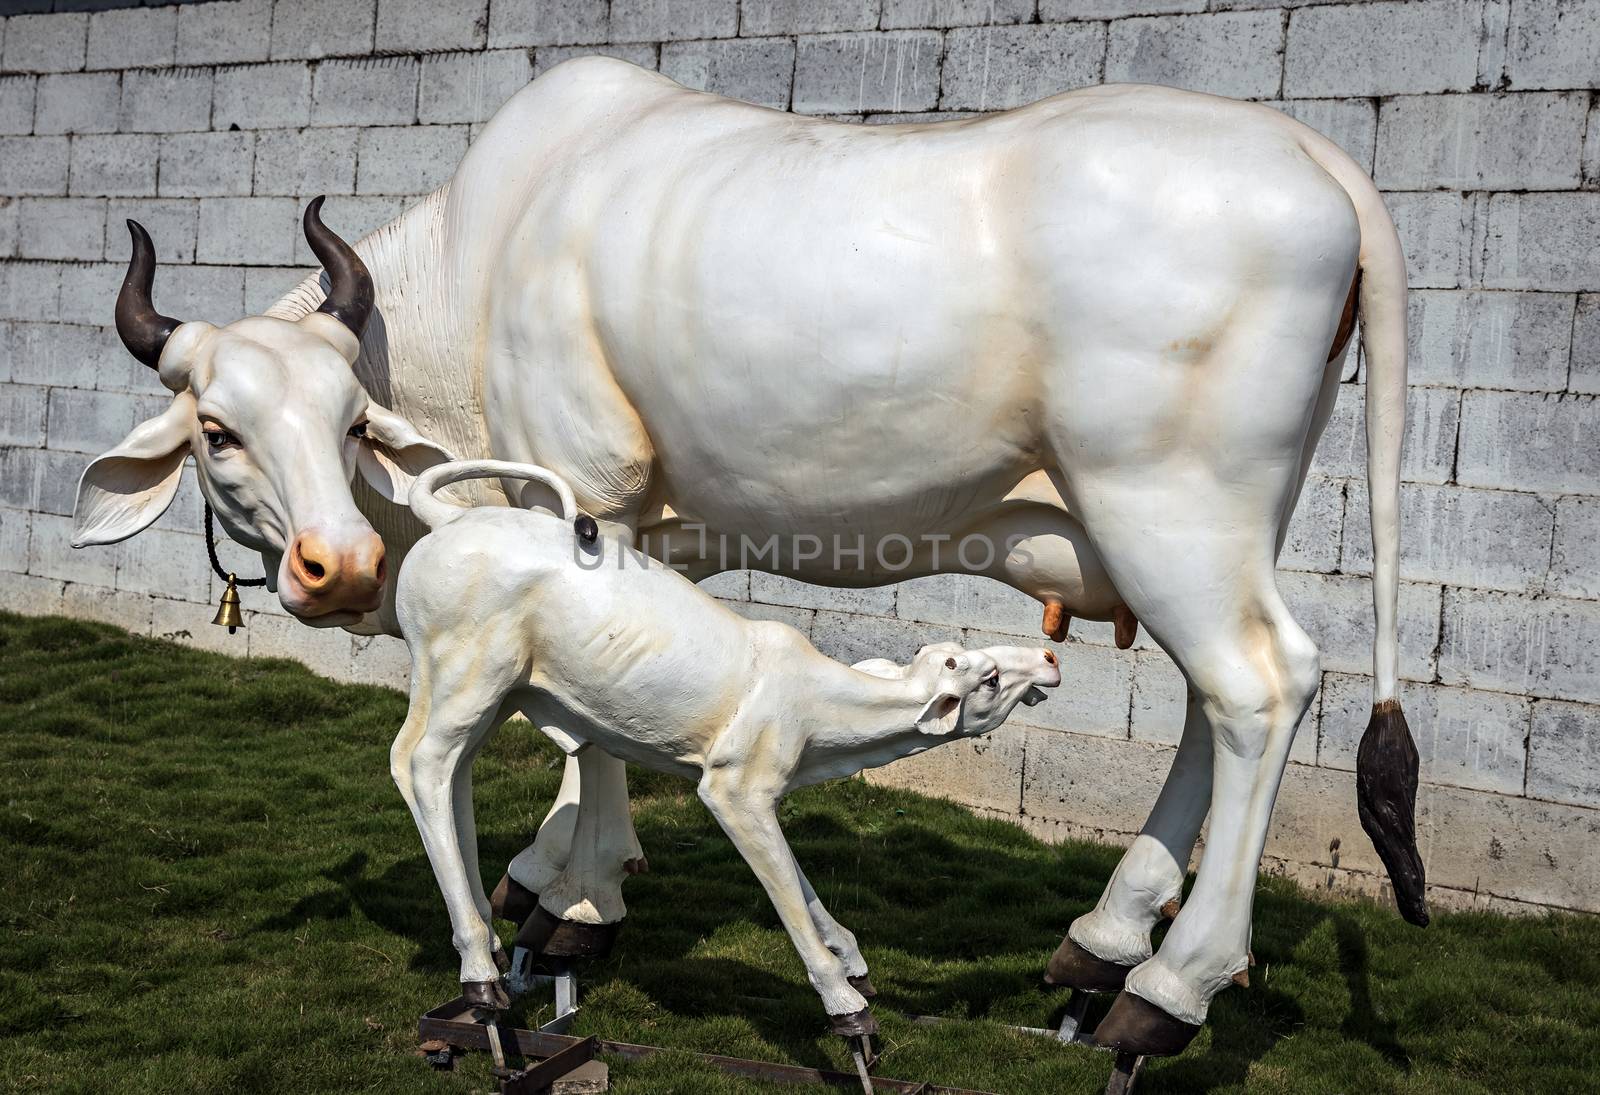 Beautifully crafted real-size sculpture of a cow milking her calf in Pune, Maharashtra, India. This life size statue is attractive and eye-catching for passers by. by lalam